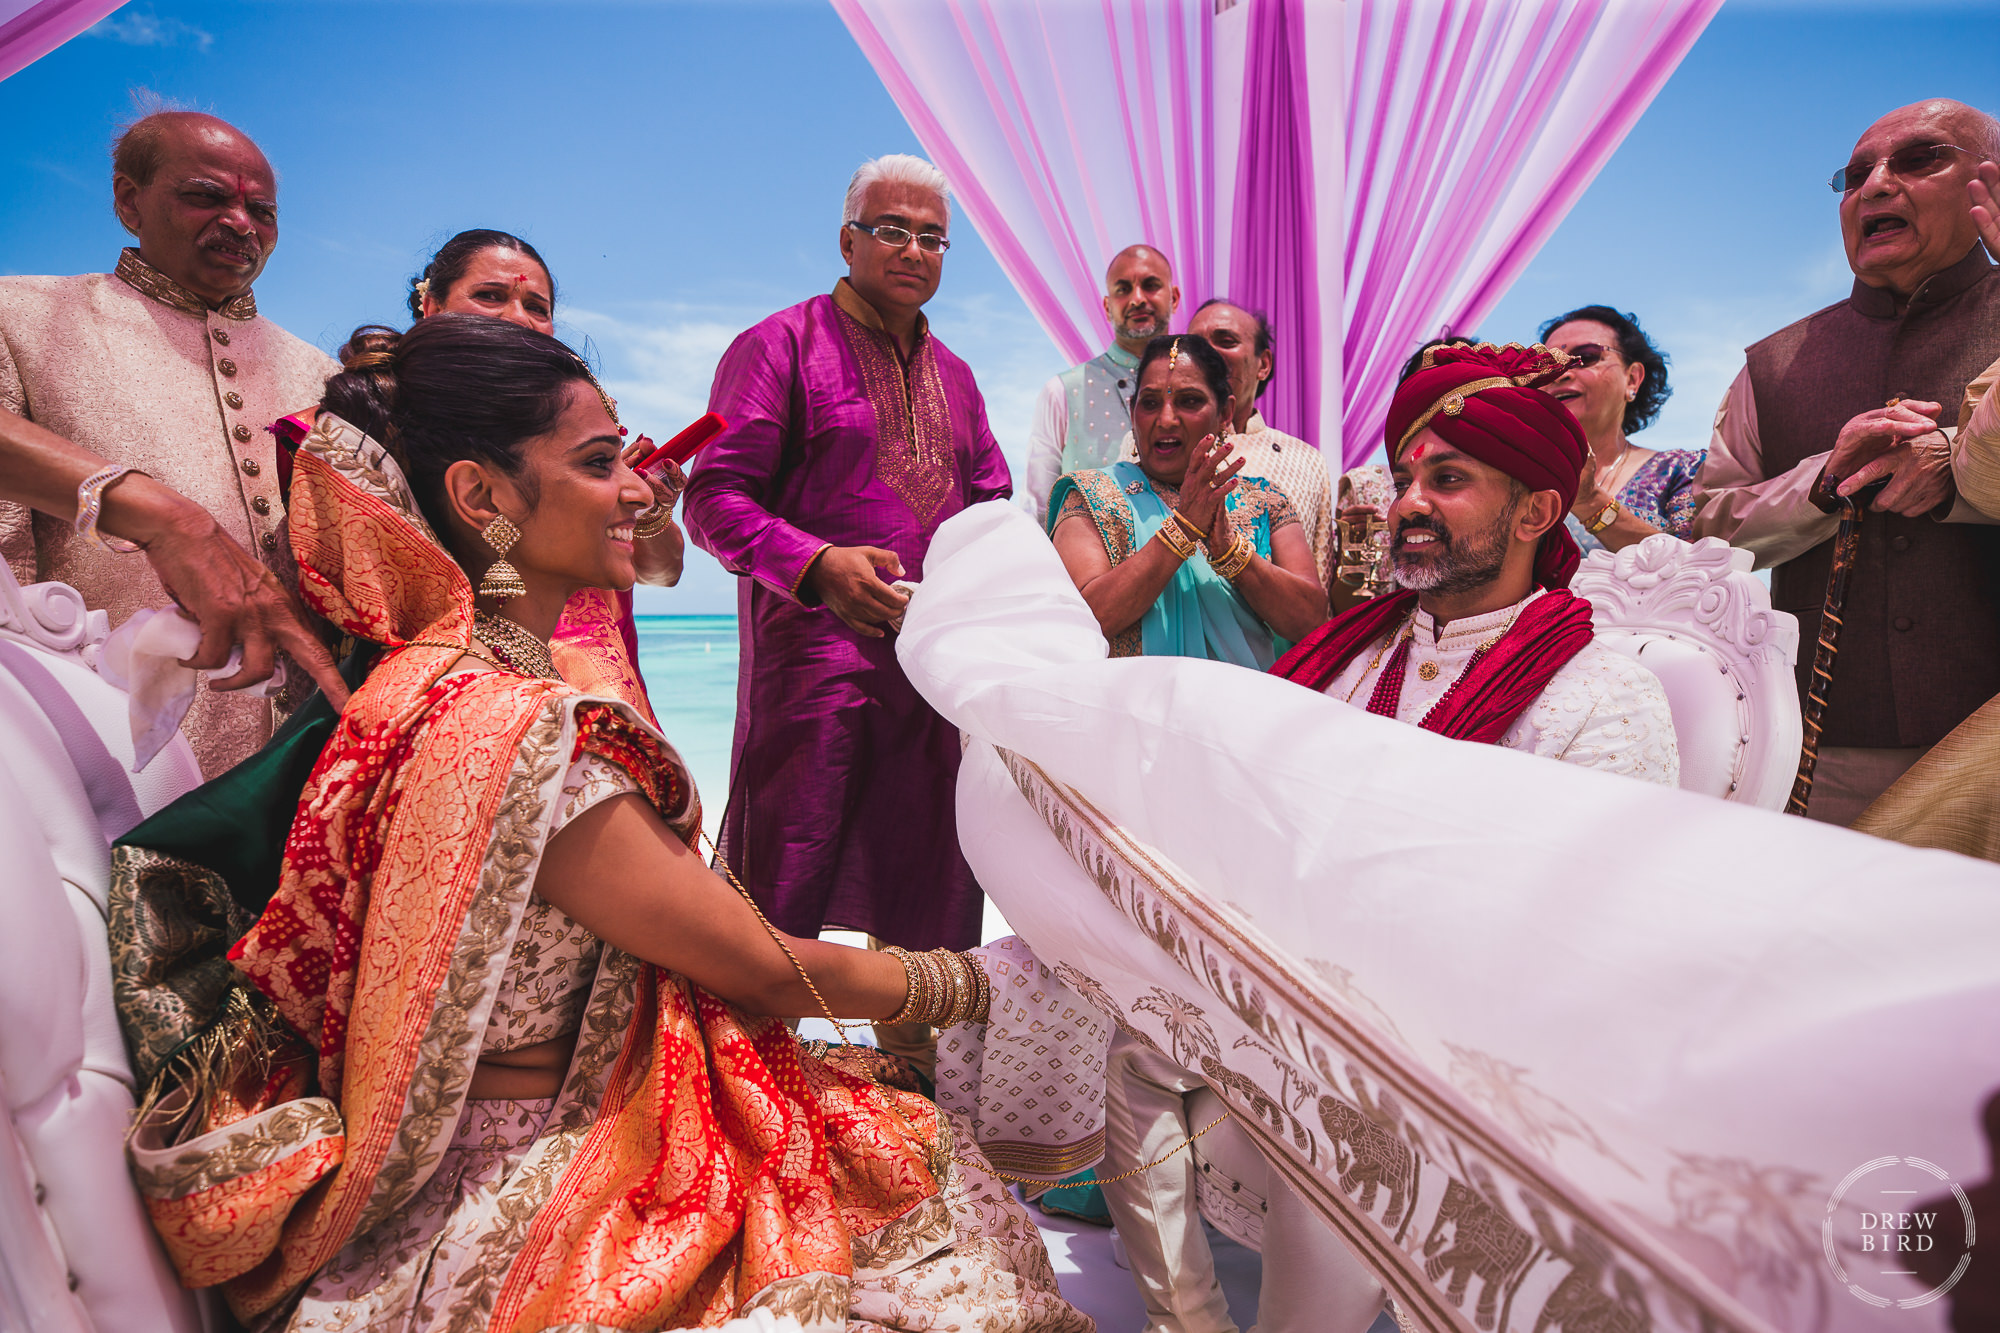 During a Hindu wedding ceremony on the beach, the bride and groom see each other for the first time as the antarpat - also called the varmala or jaimala, which is a white sheet that prevents the couple from seeing each other, is raised. The couple are holding hands and their family are standing in the background crying, laughing, and clapping. The white sheet symbolizes the two families being separate, lifting the sheet symbolizes the families being joined together. A destination Indian wedding photography story at the Hilton Aruba resort in the Caribbean by SF photographer Drew Bird.